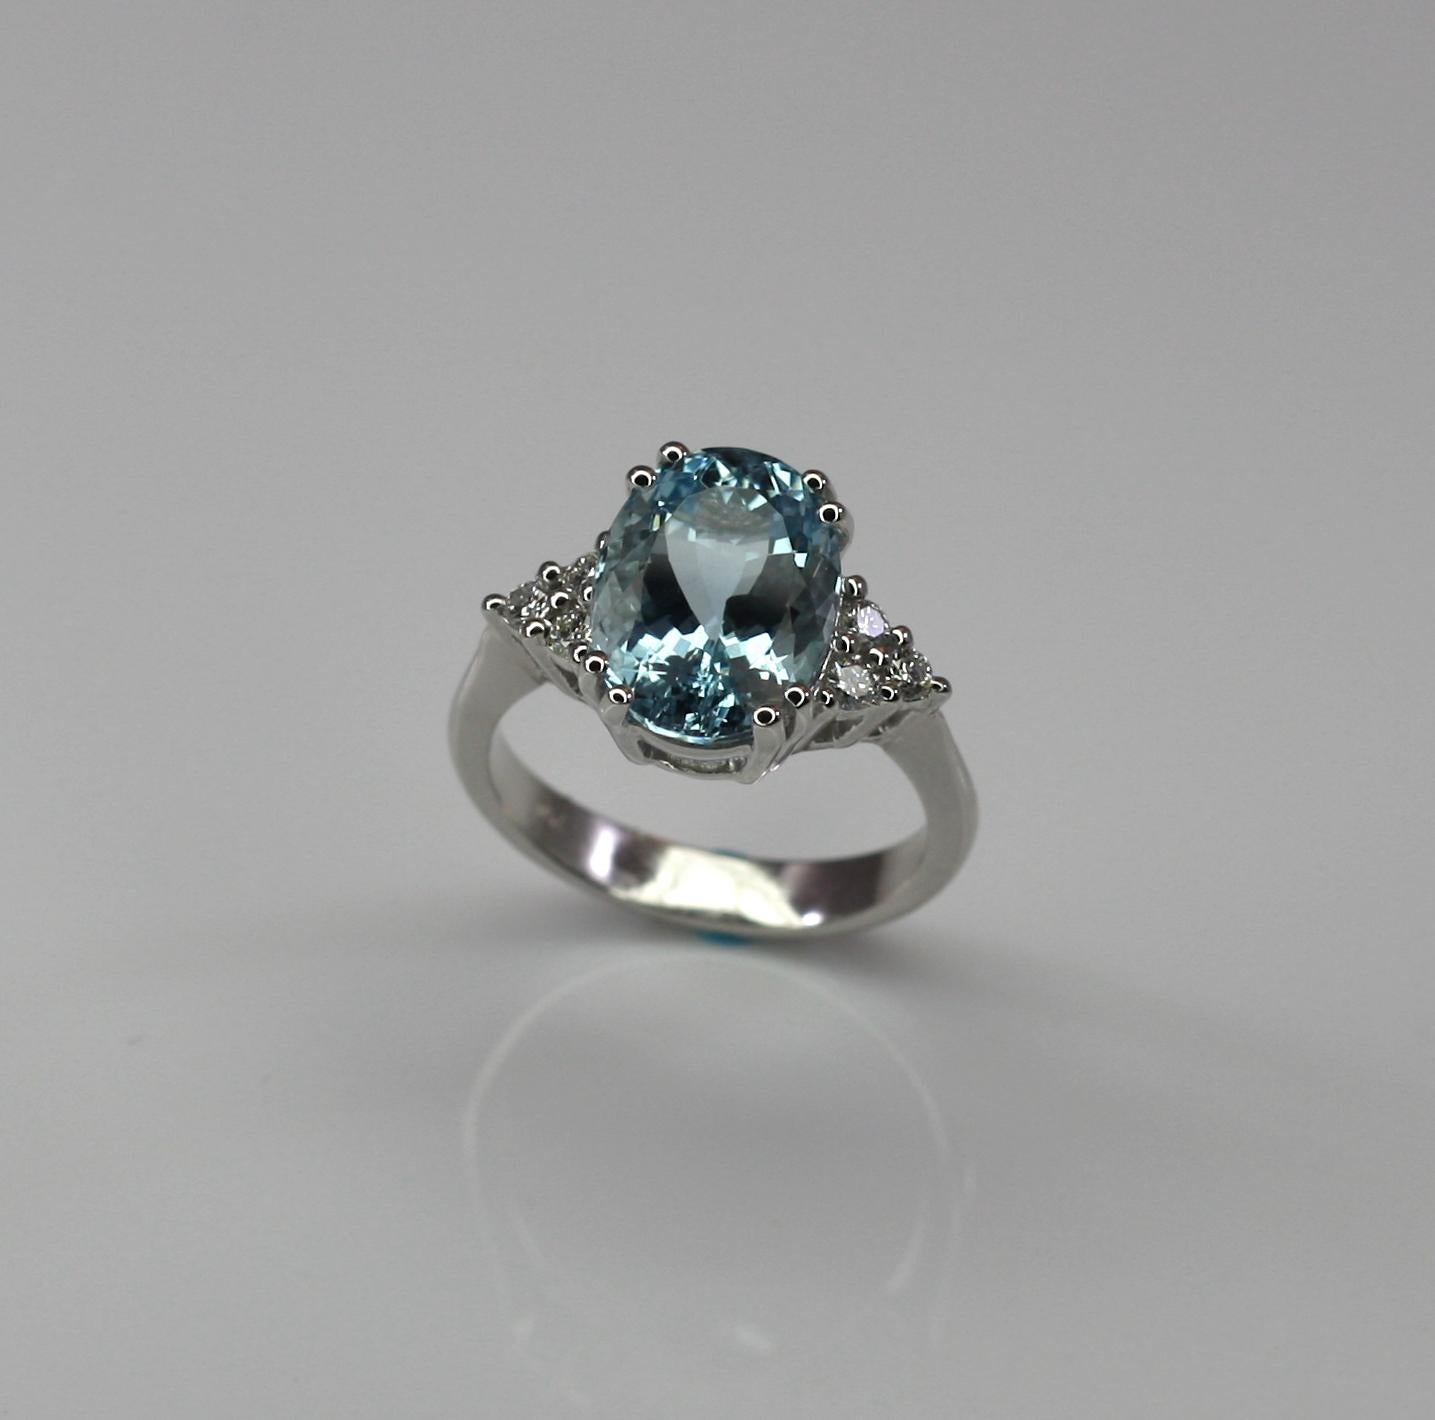 Women's Georgios Collections 18 Karat White Gold Aquamarine Solitaire Ring with Diamonds